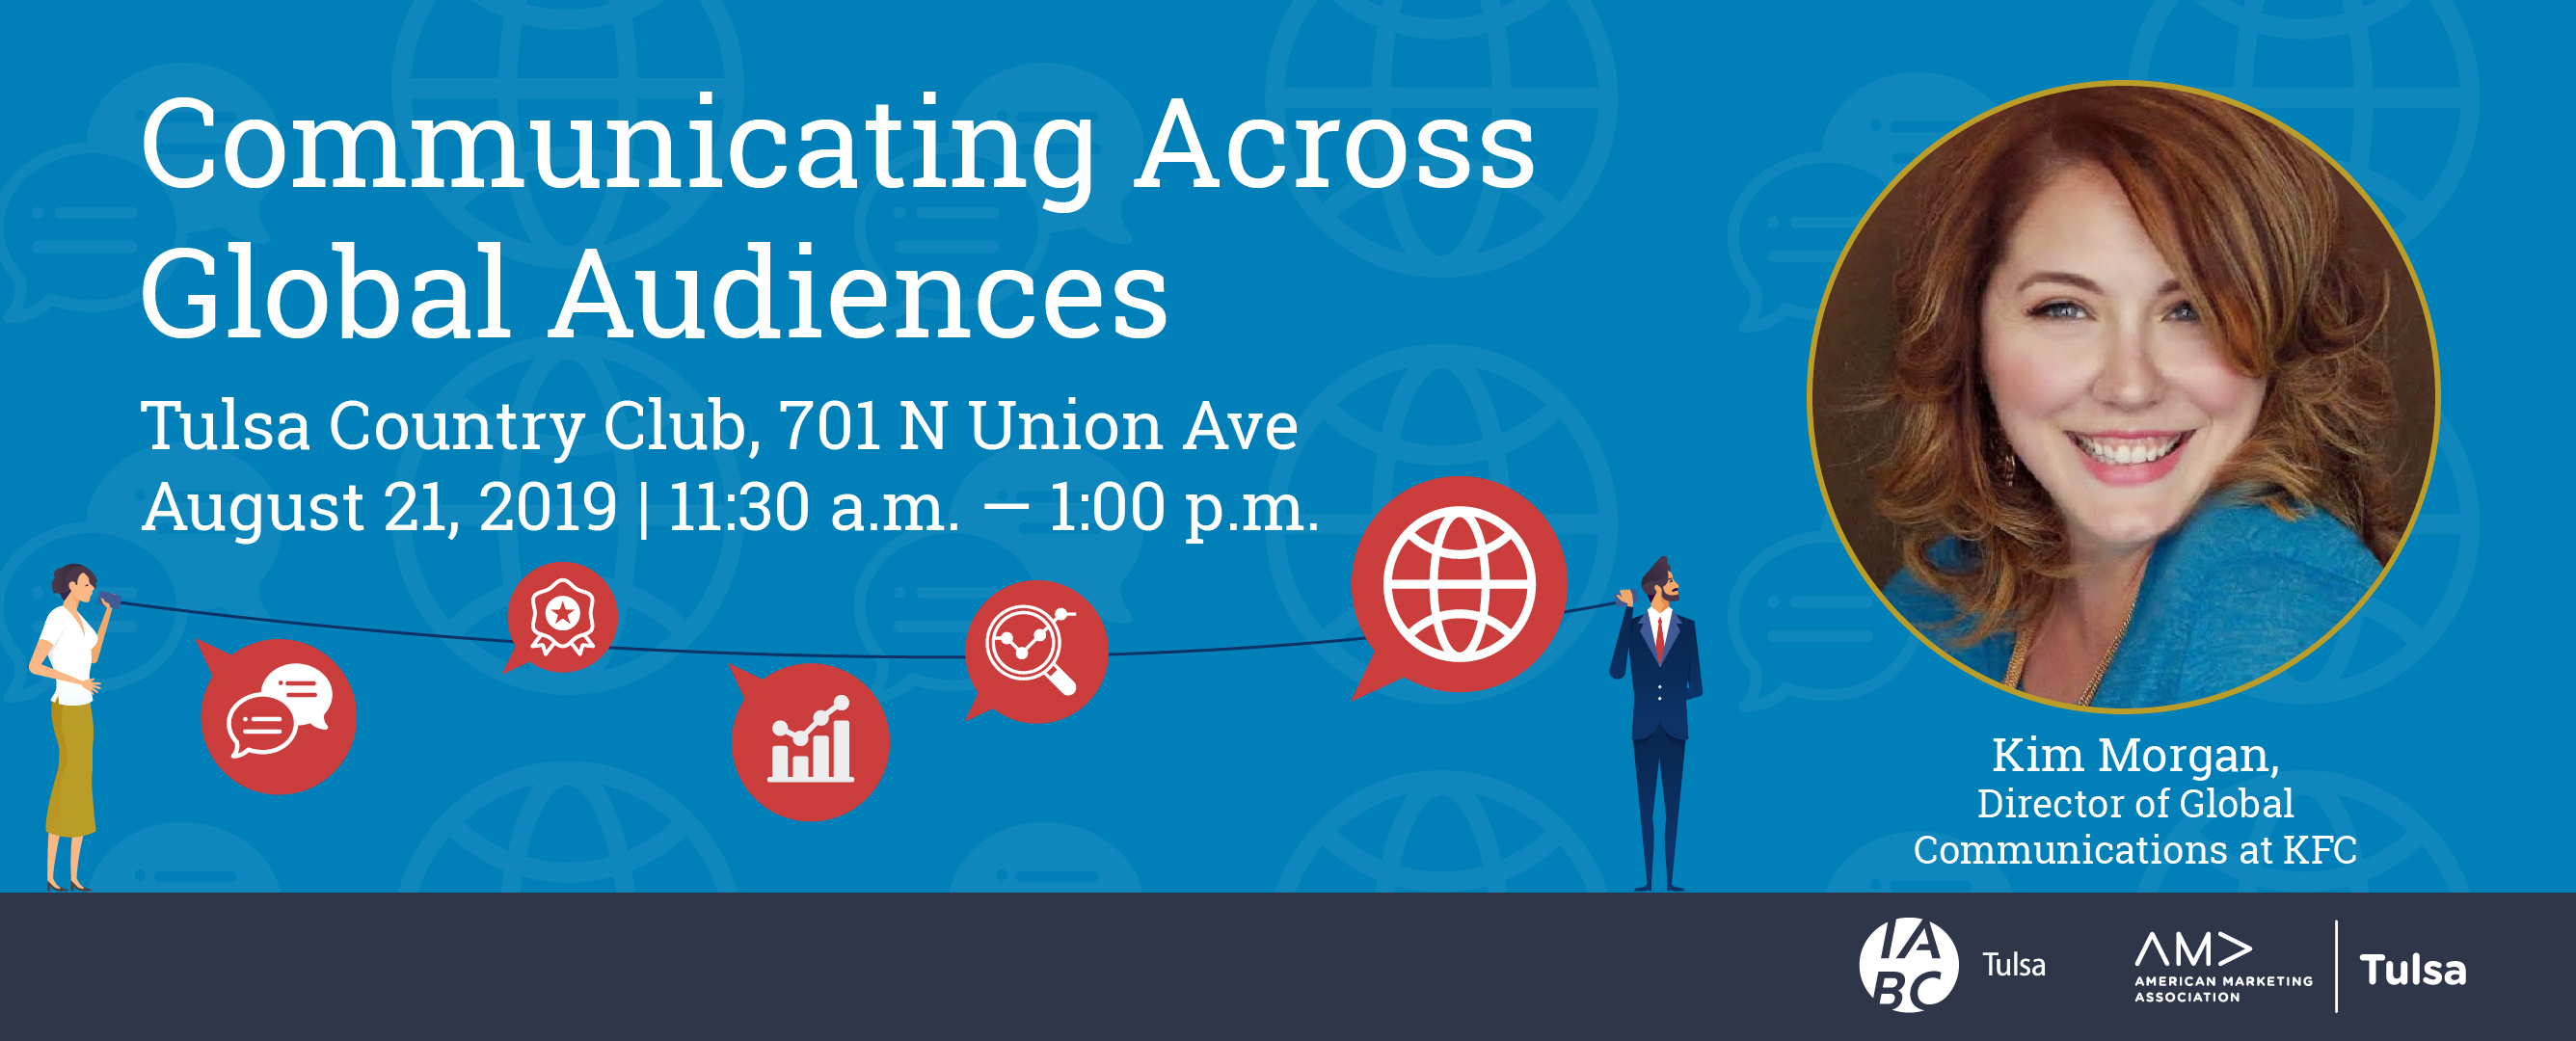 Communicating Across Global Audiences Tulsa country club, 701 N Union Ave August 21,2019 | 11:30 a.m. - 1 p.m.